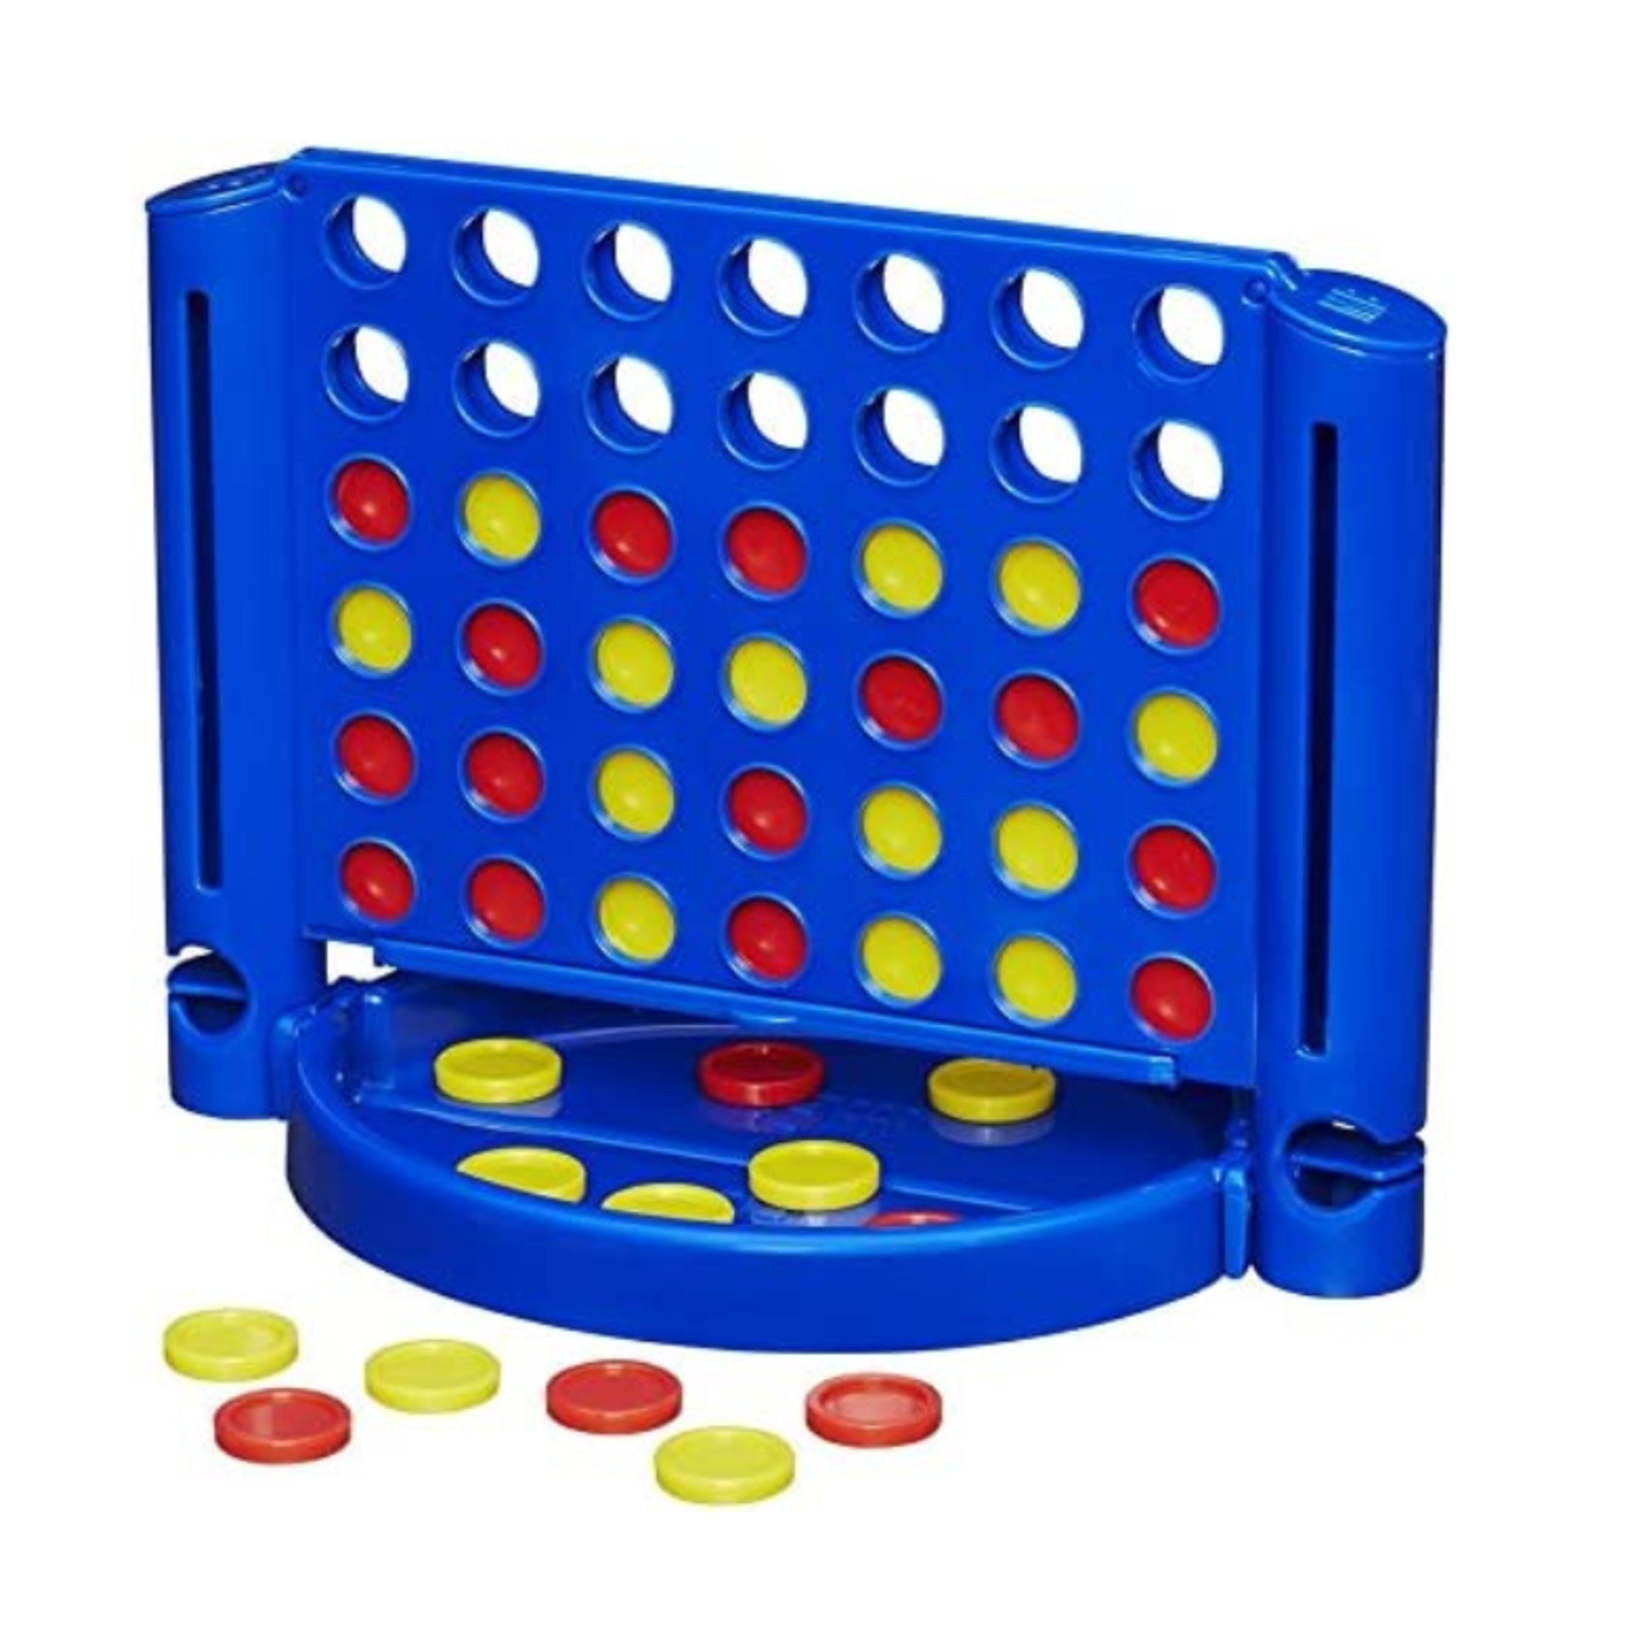 Hasbro Connect 4 Grab and Go Game